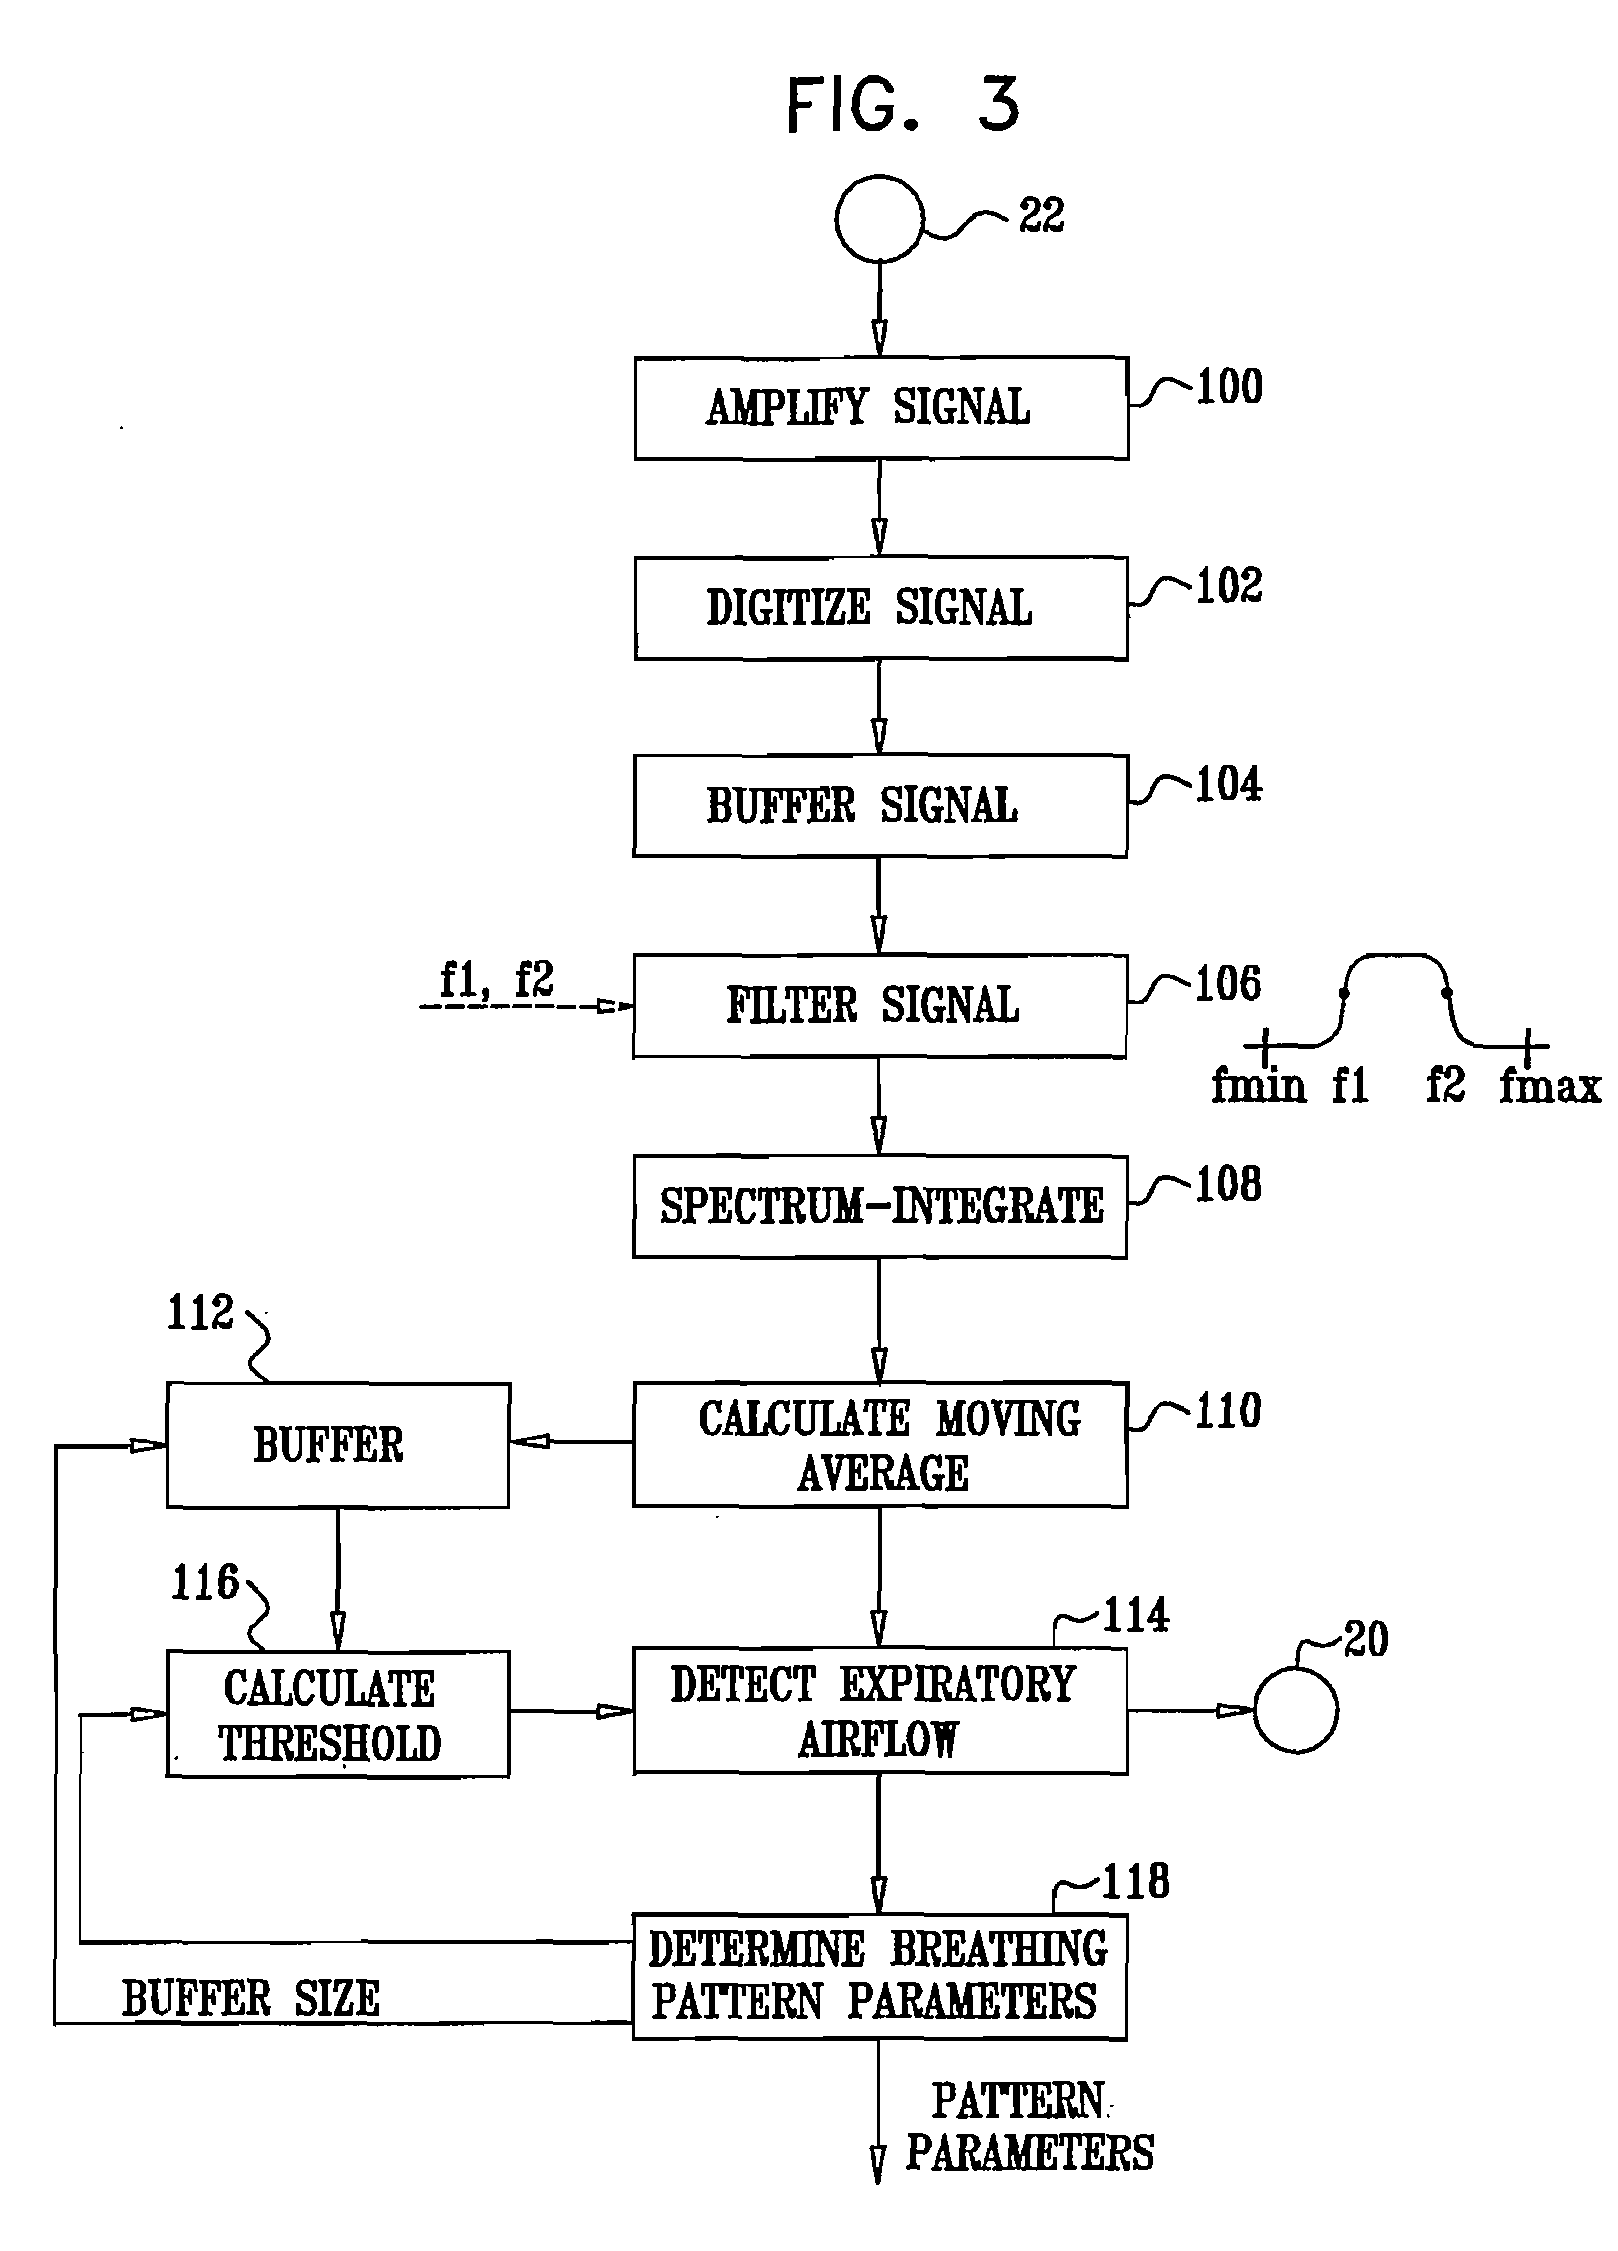 Apparatus and method for breathing pattern determination using a non-contact microphone